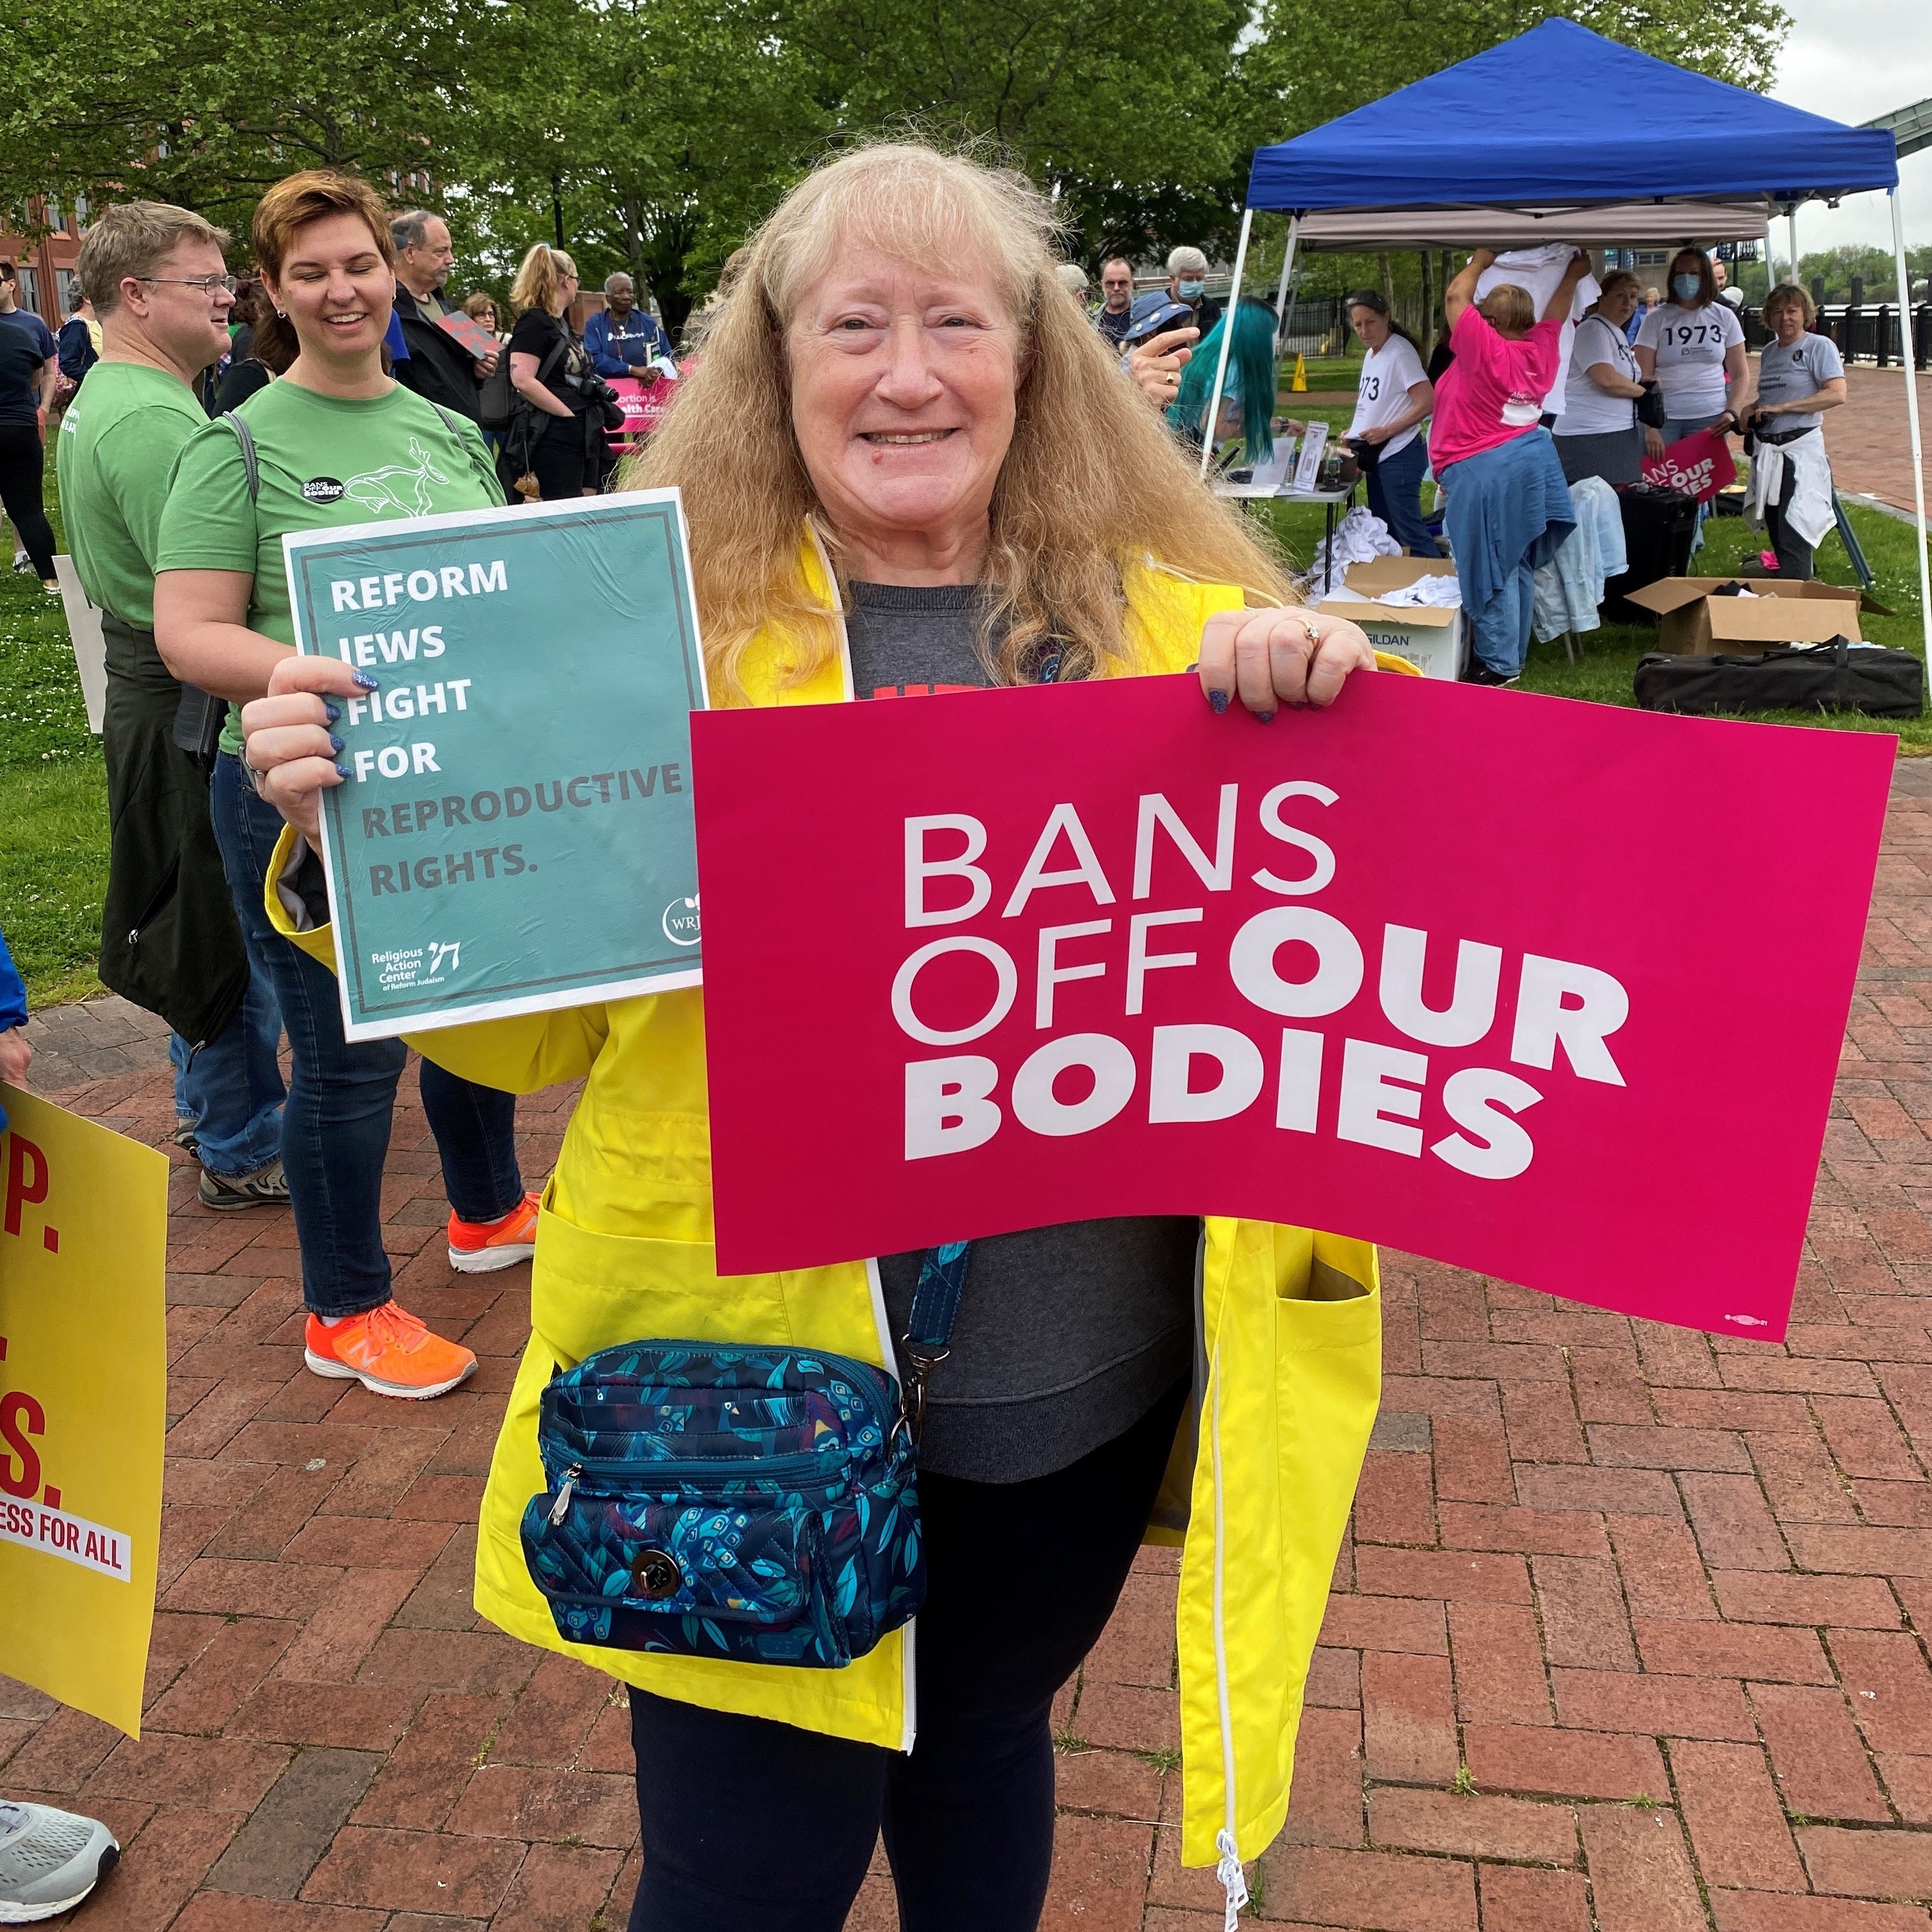 Bans off our bodies rally protestor